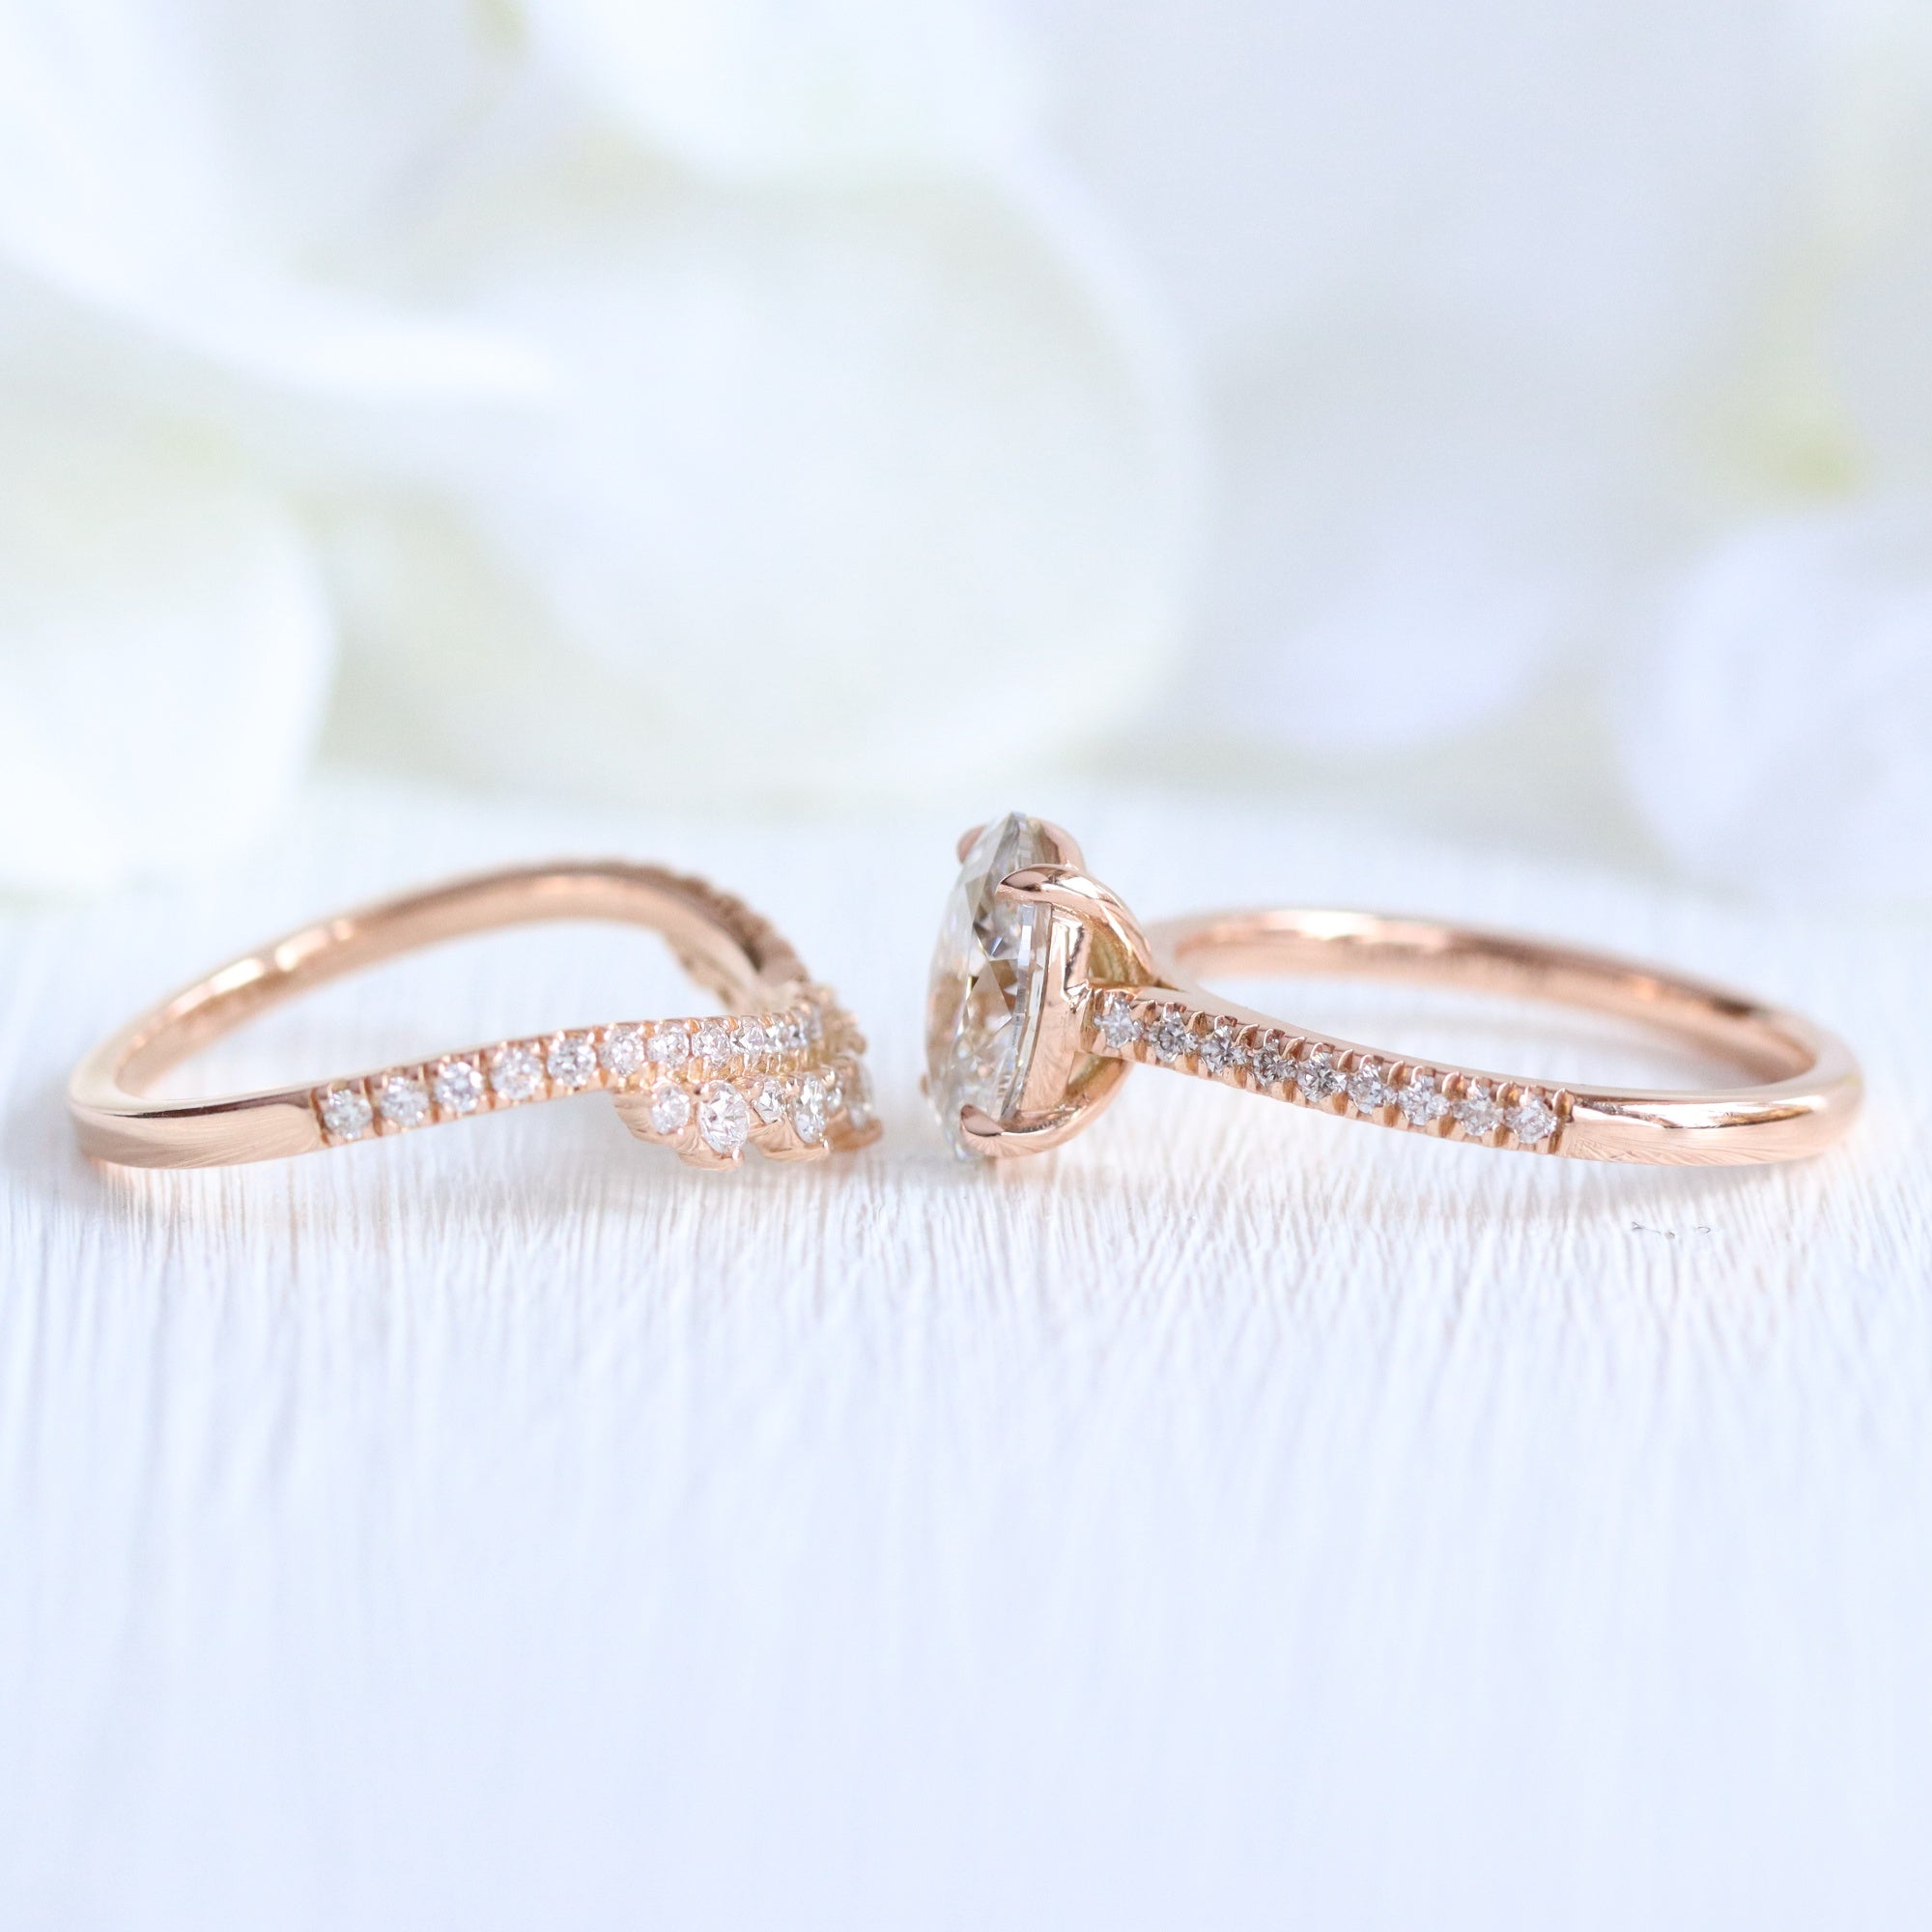 lab diamond ring stack rose gold oval diamond solitaire engagement ring set La More Design Jewelry